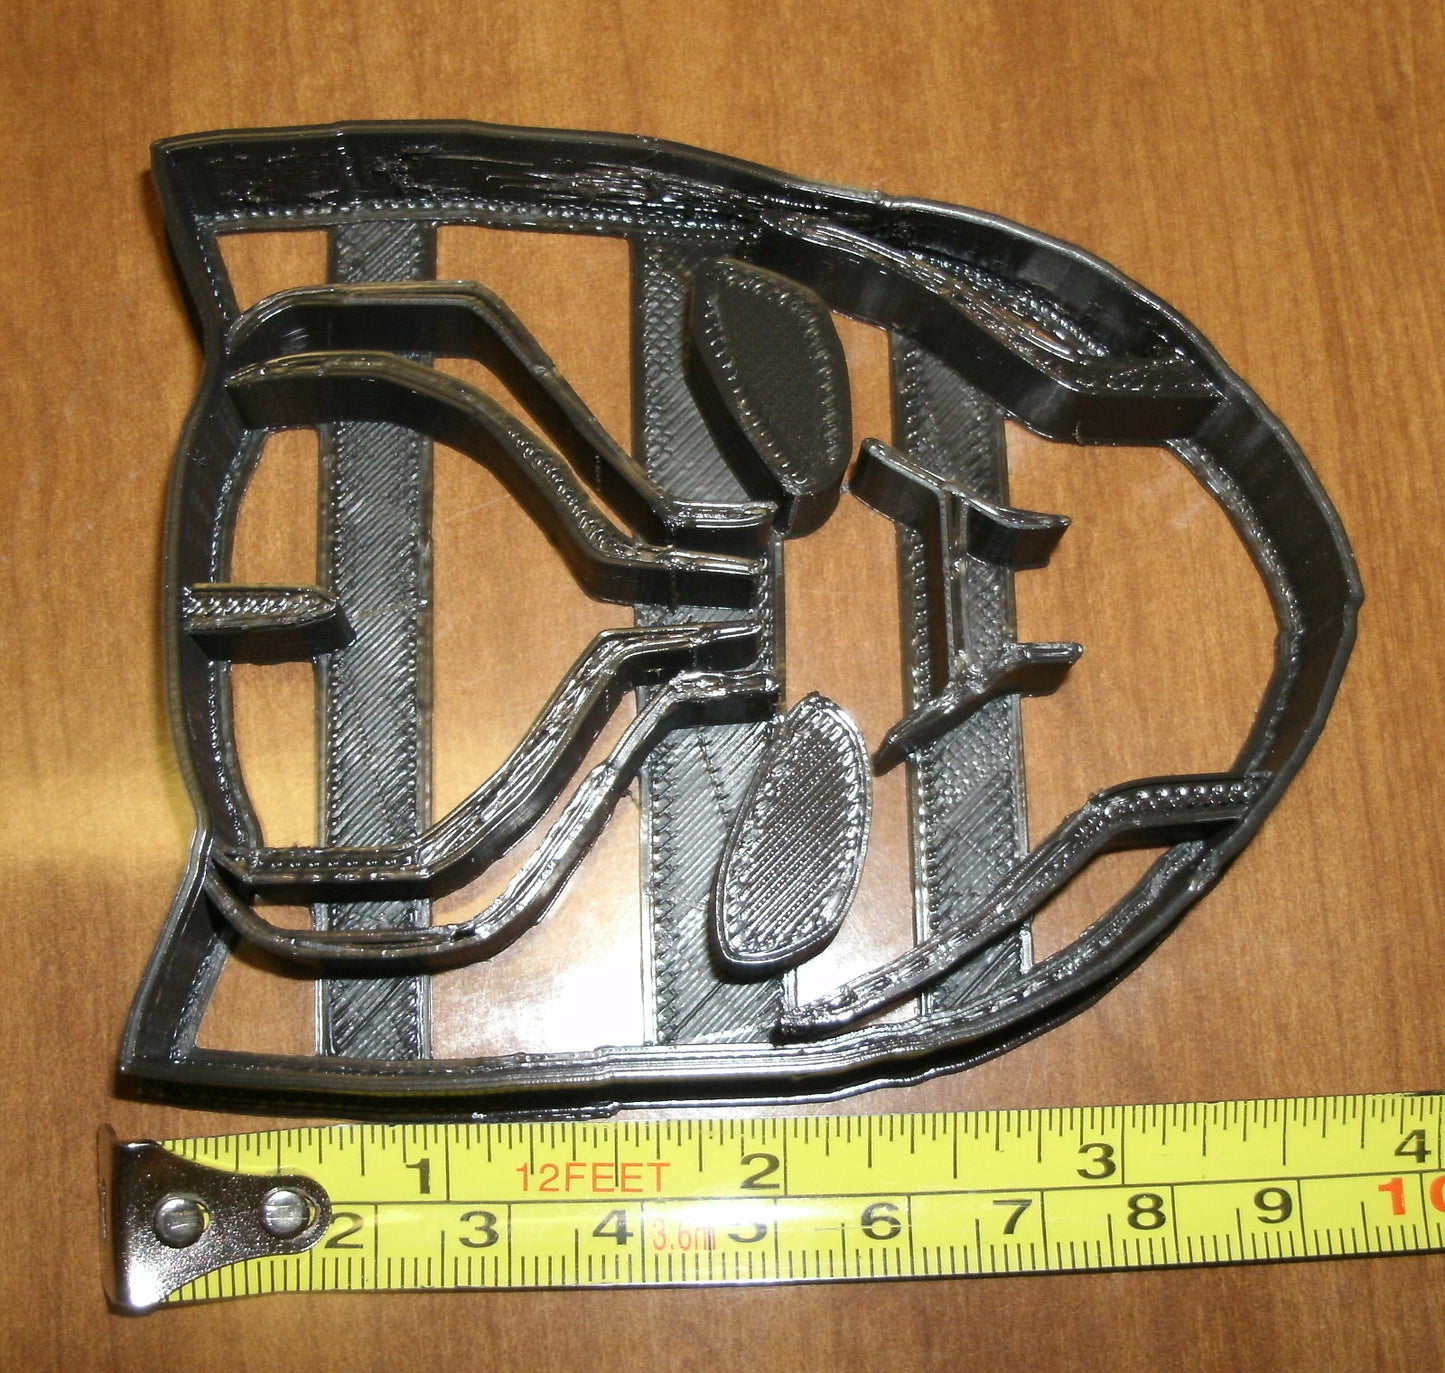 Black Panther Face Mask Superhero Character Cookie Cutter Made in USA PR599